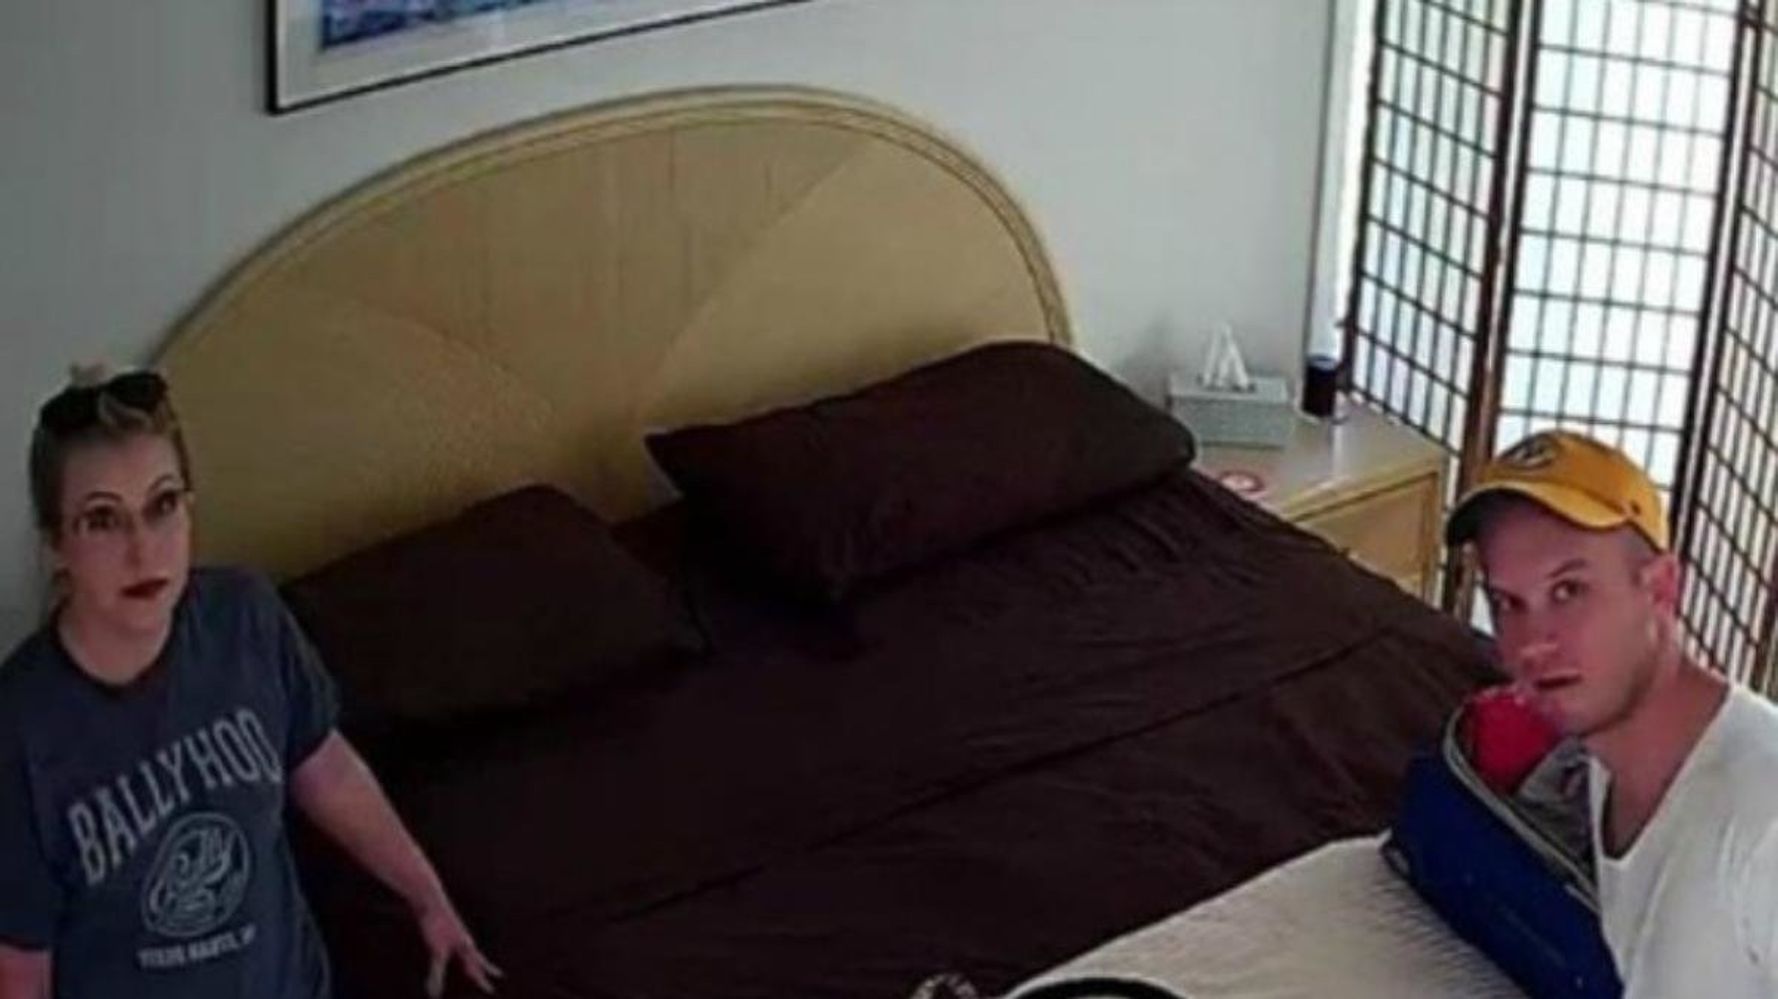 1778px x 999px - Couple Uncovers Hidden Cameras In Nightmare Airbnb Stay: Police | HuffPost  Latest News